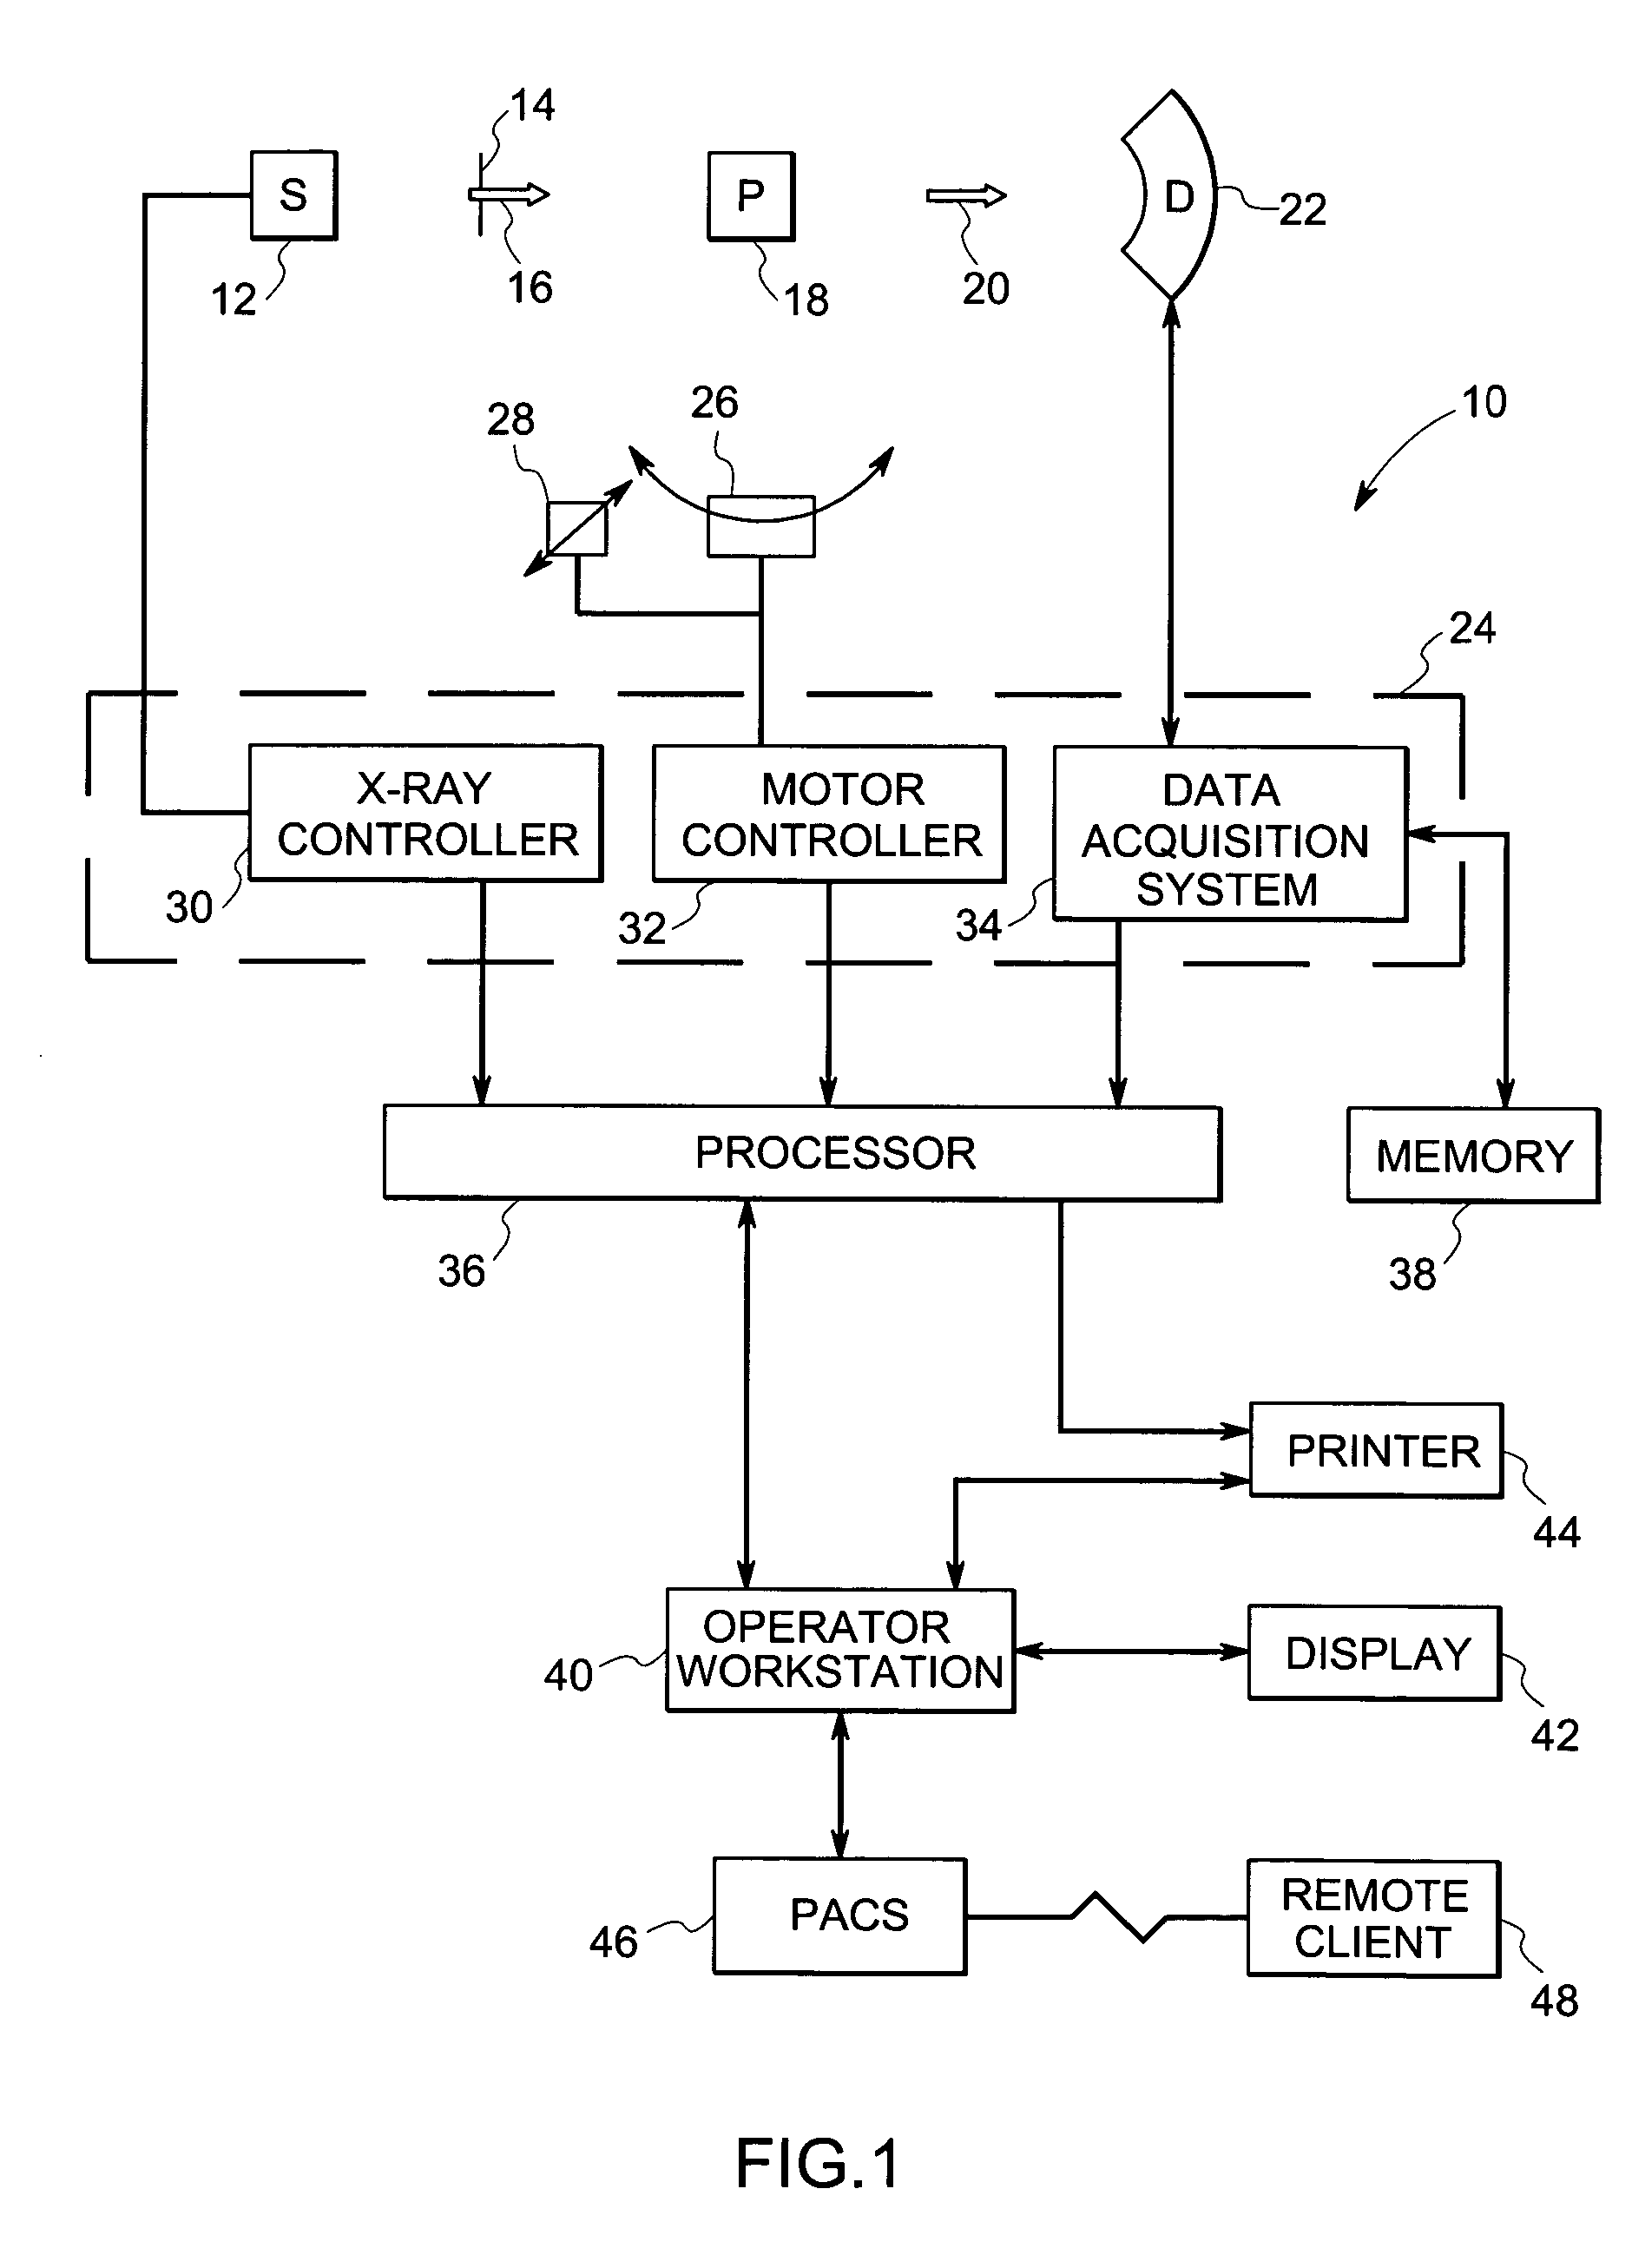 Method and apparatus for efficient calculation and use of reconstructed pixel variance in tomography images